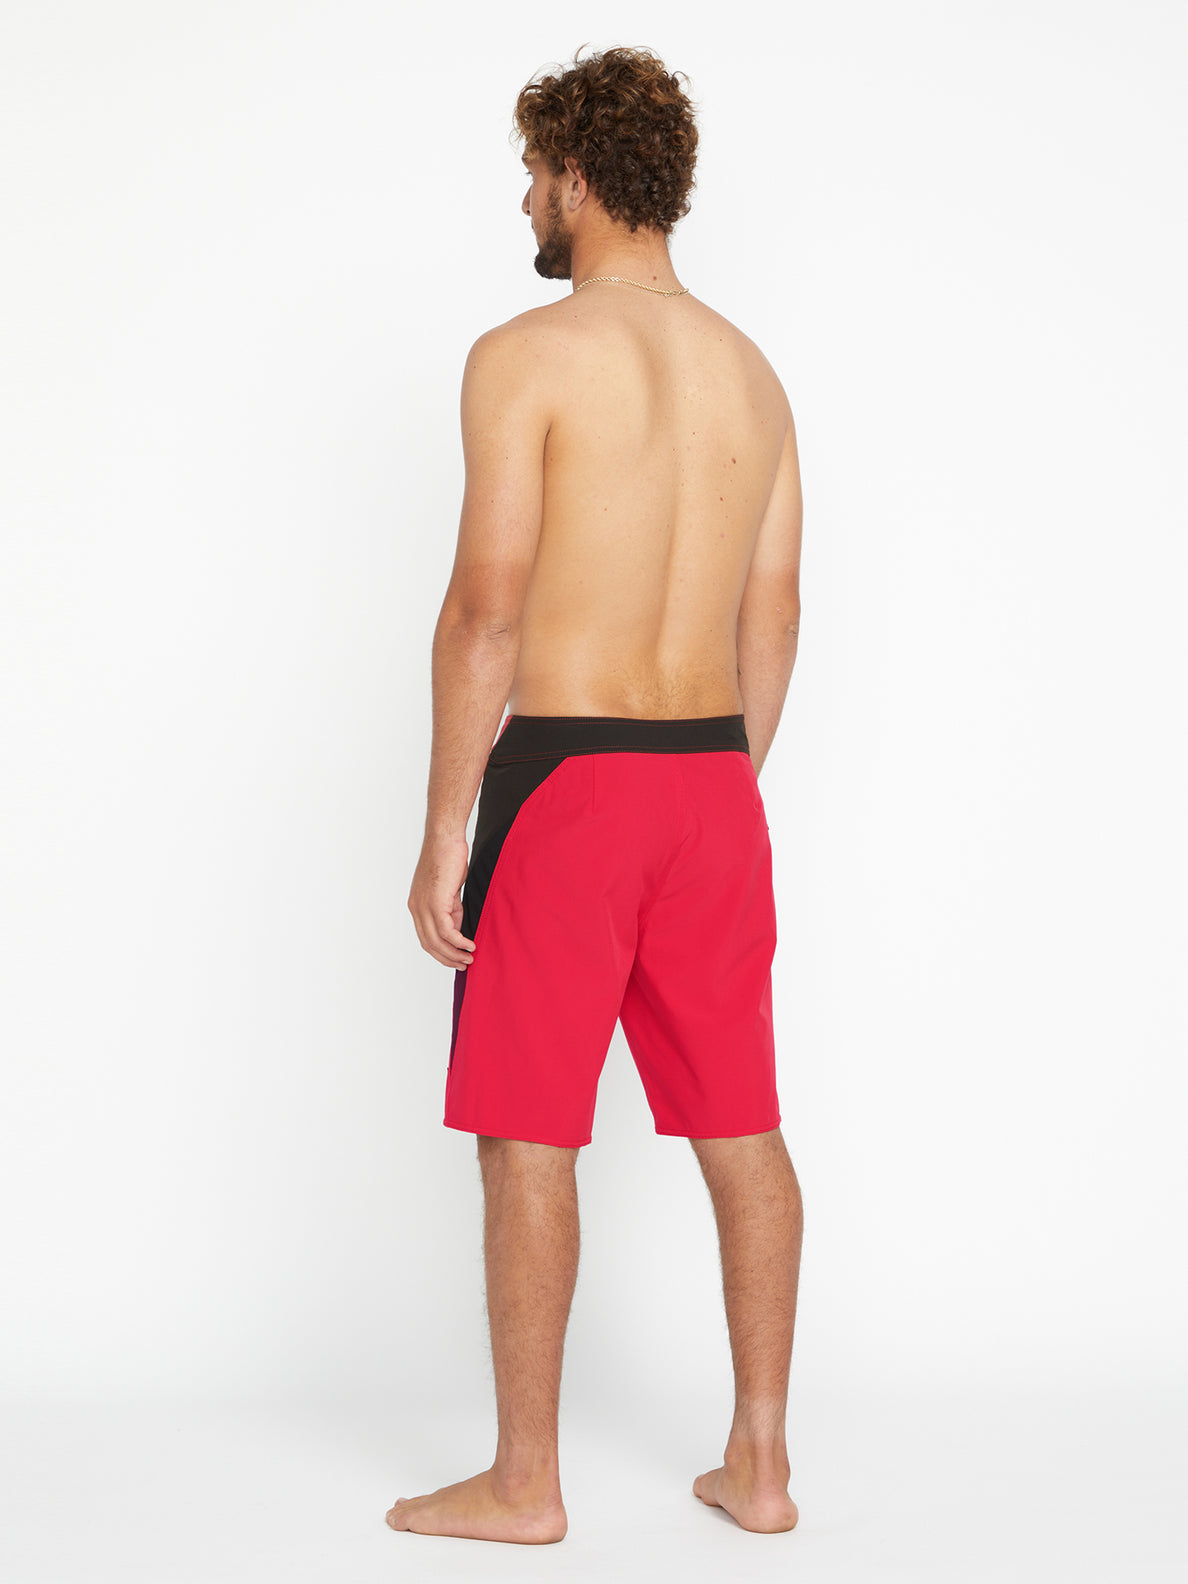 Surf Vitals Jack Robinson Mod-Tech Trunks - Red (A0812301_RED) [9]